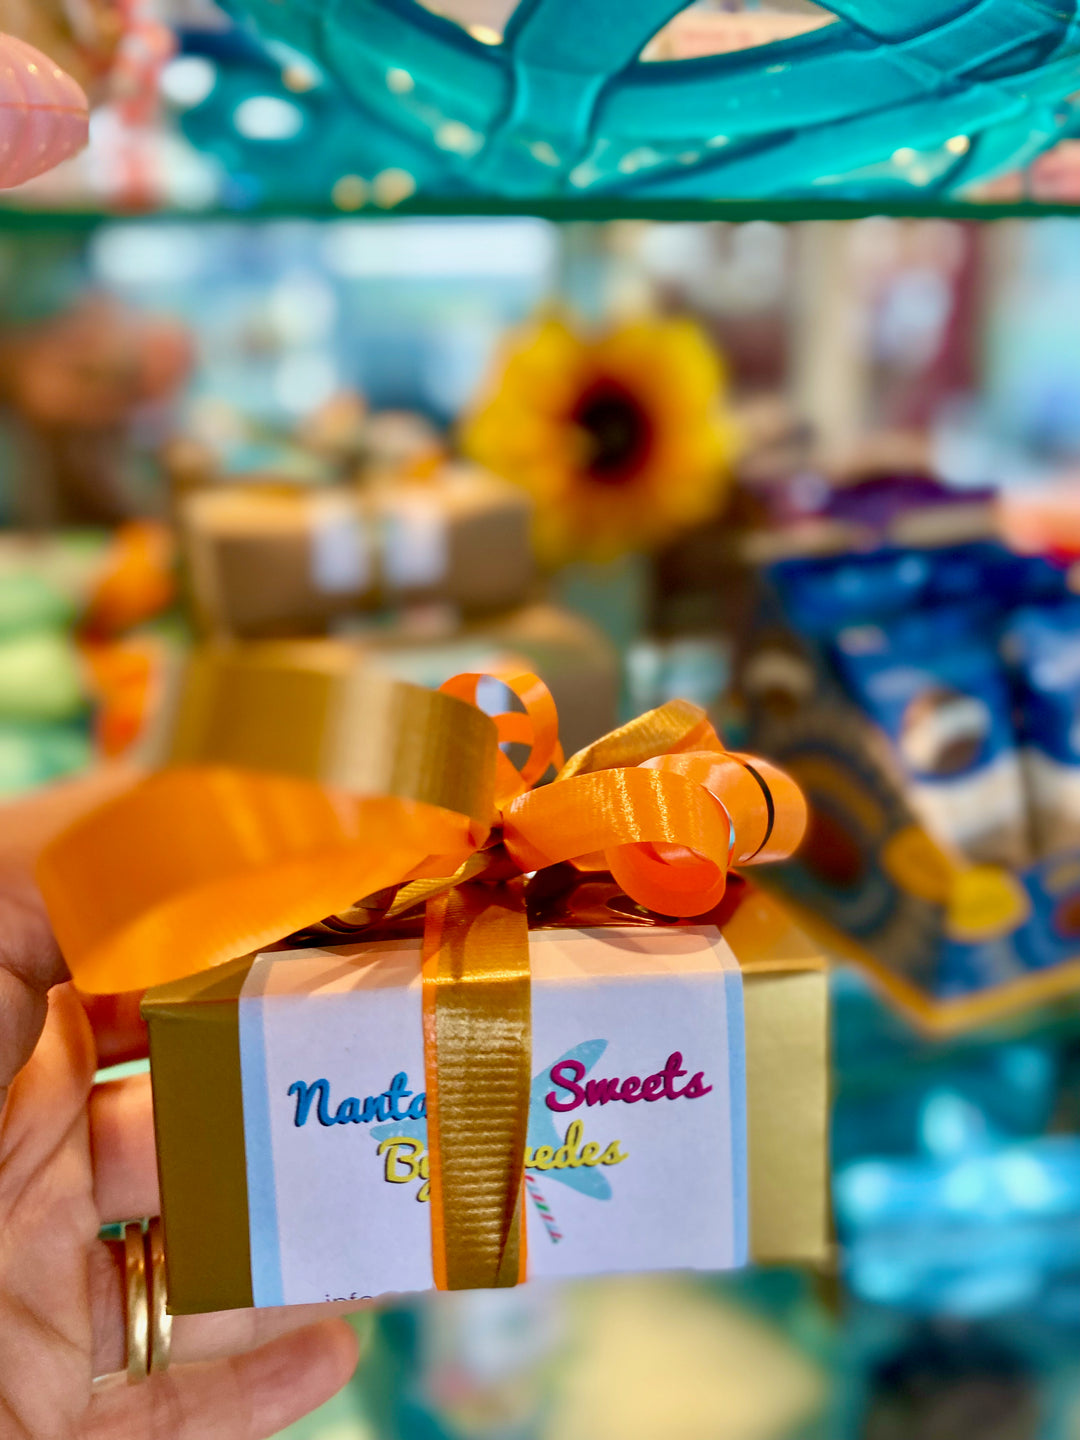 "Sweets By Swedes” Corporate gift-packaging, seasonal theme & flavors